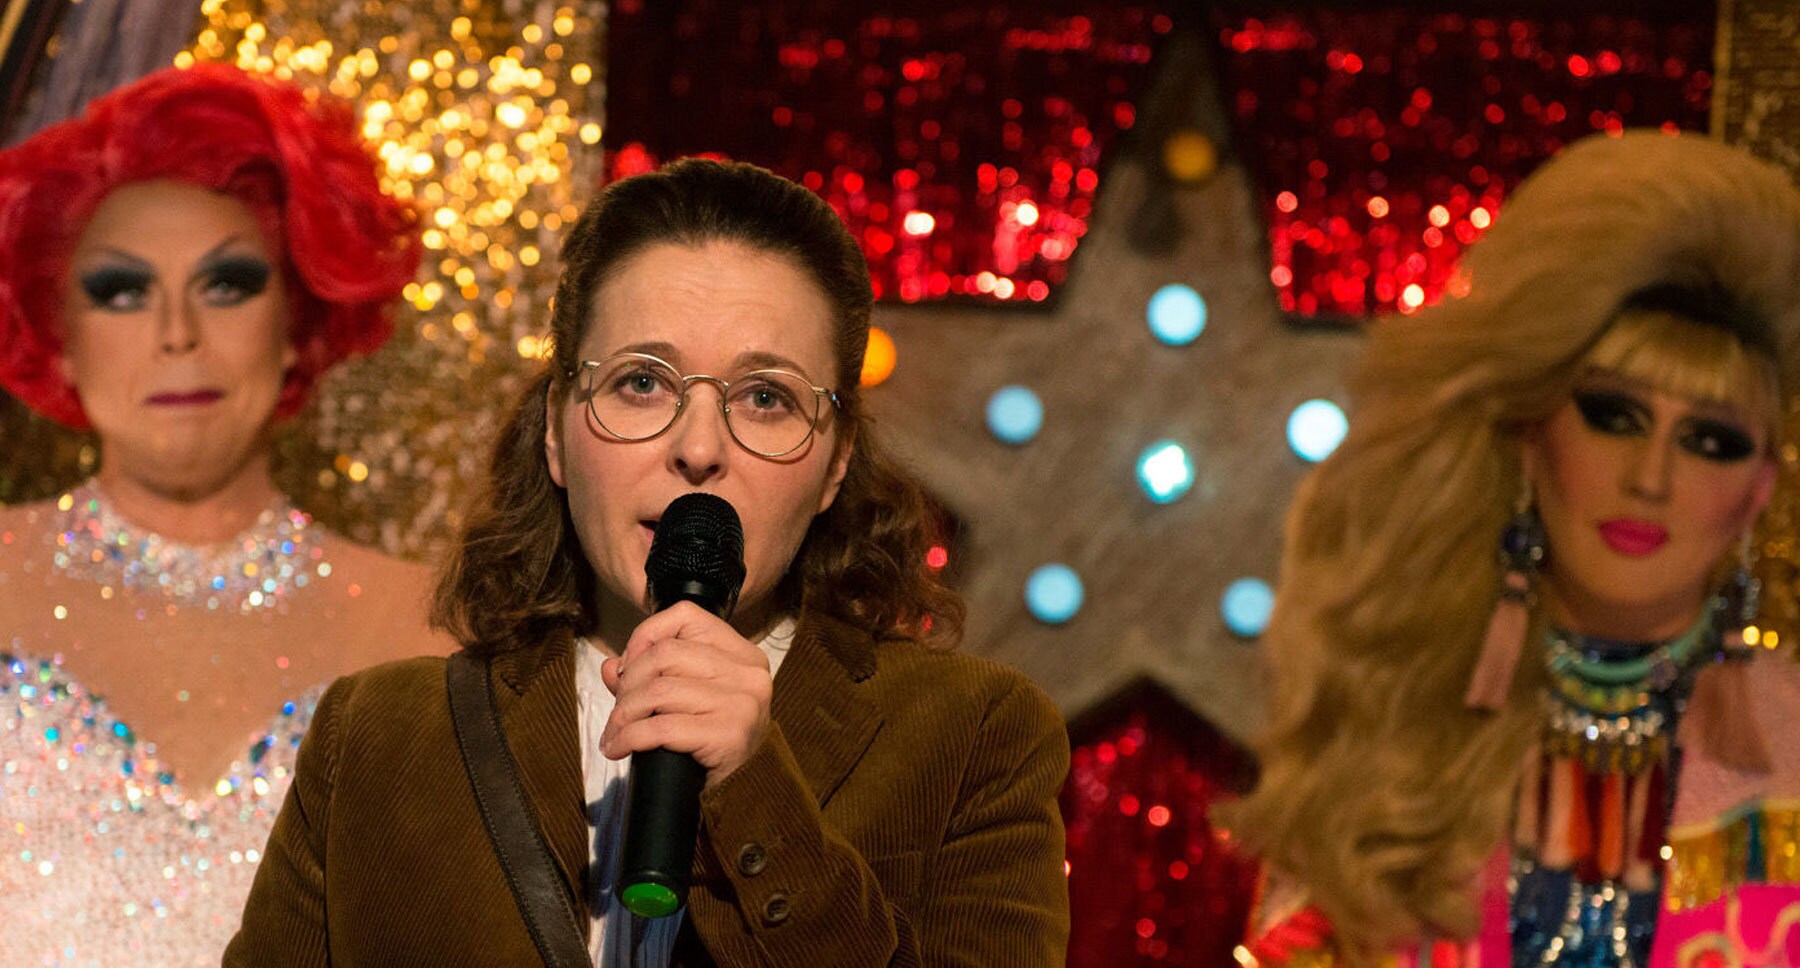 Julia Sawalha (as Saffy) singing in "Absolutely Fabulous: The Movie"